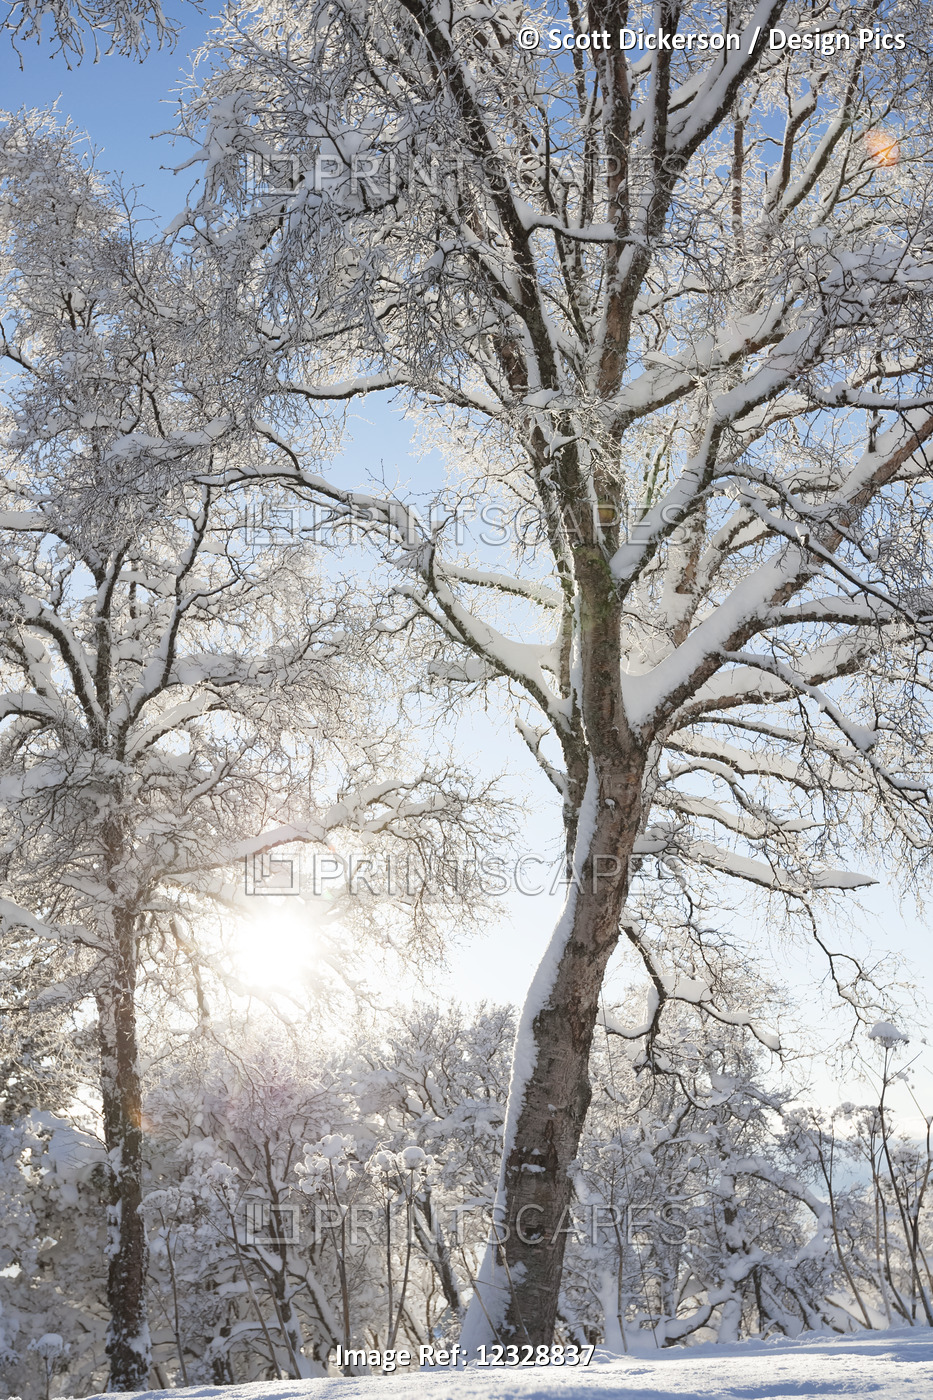 Trees Covered In Snow And Hoarfrost Backlit By The Sunlight Against A Blue Sky; ...